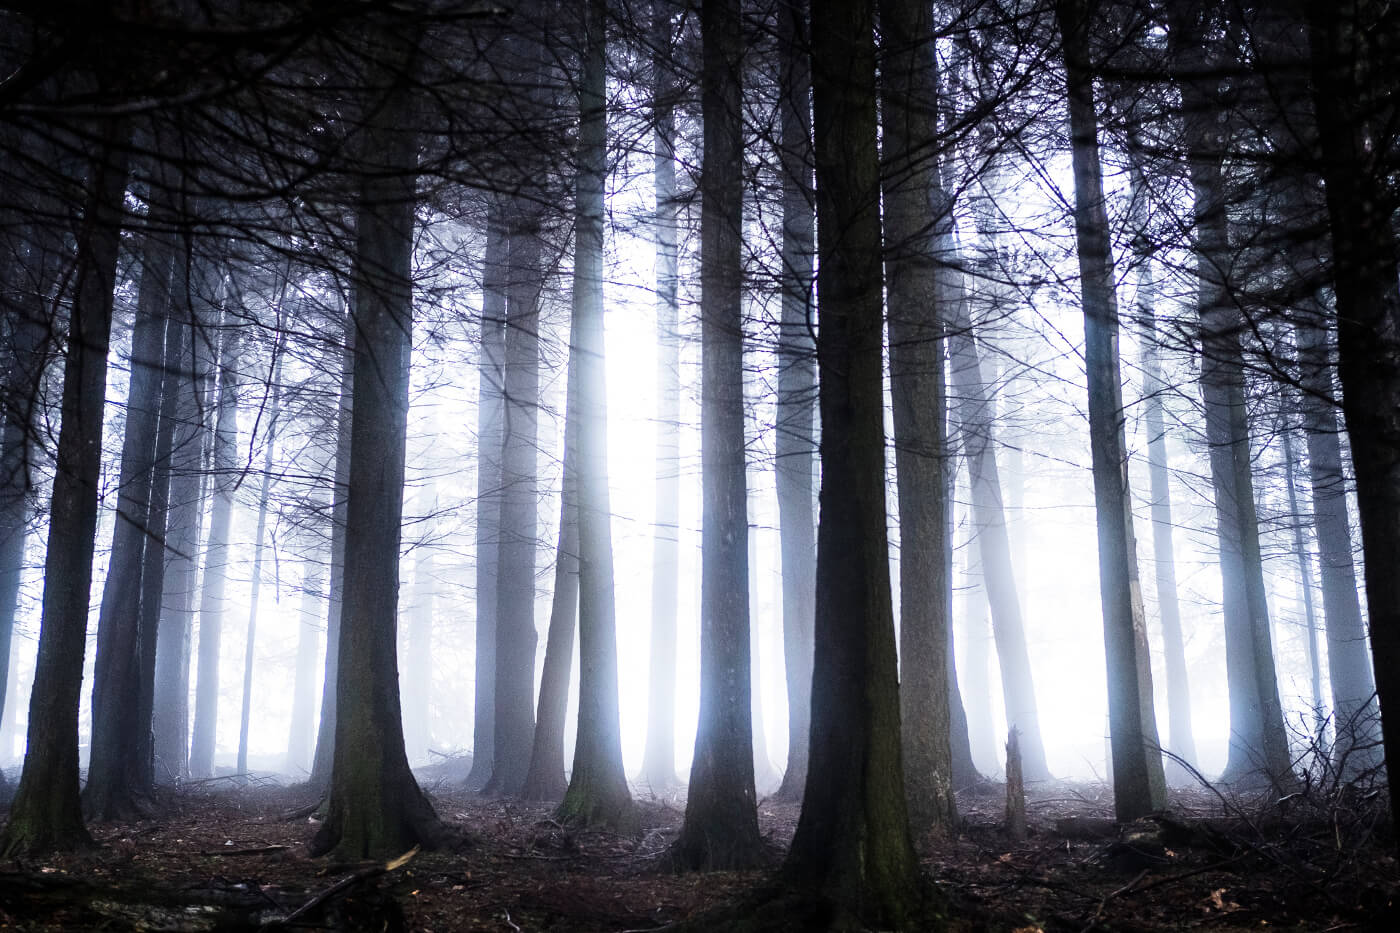 Eerie woods in the West country